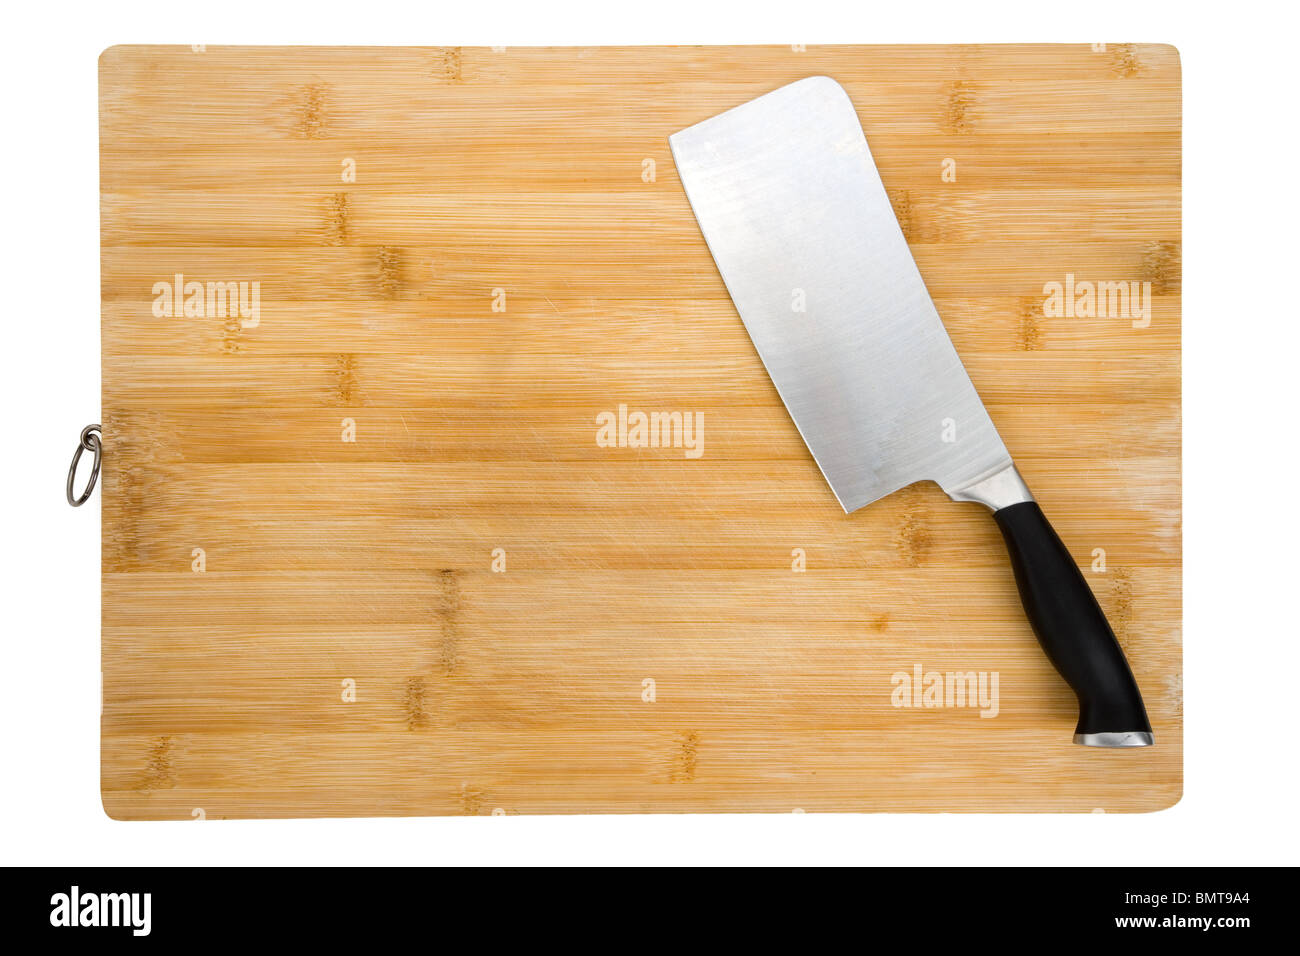 Cutting Board and Kitchen Knife close up Stock Photo